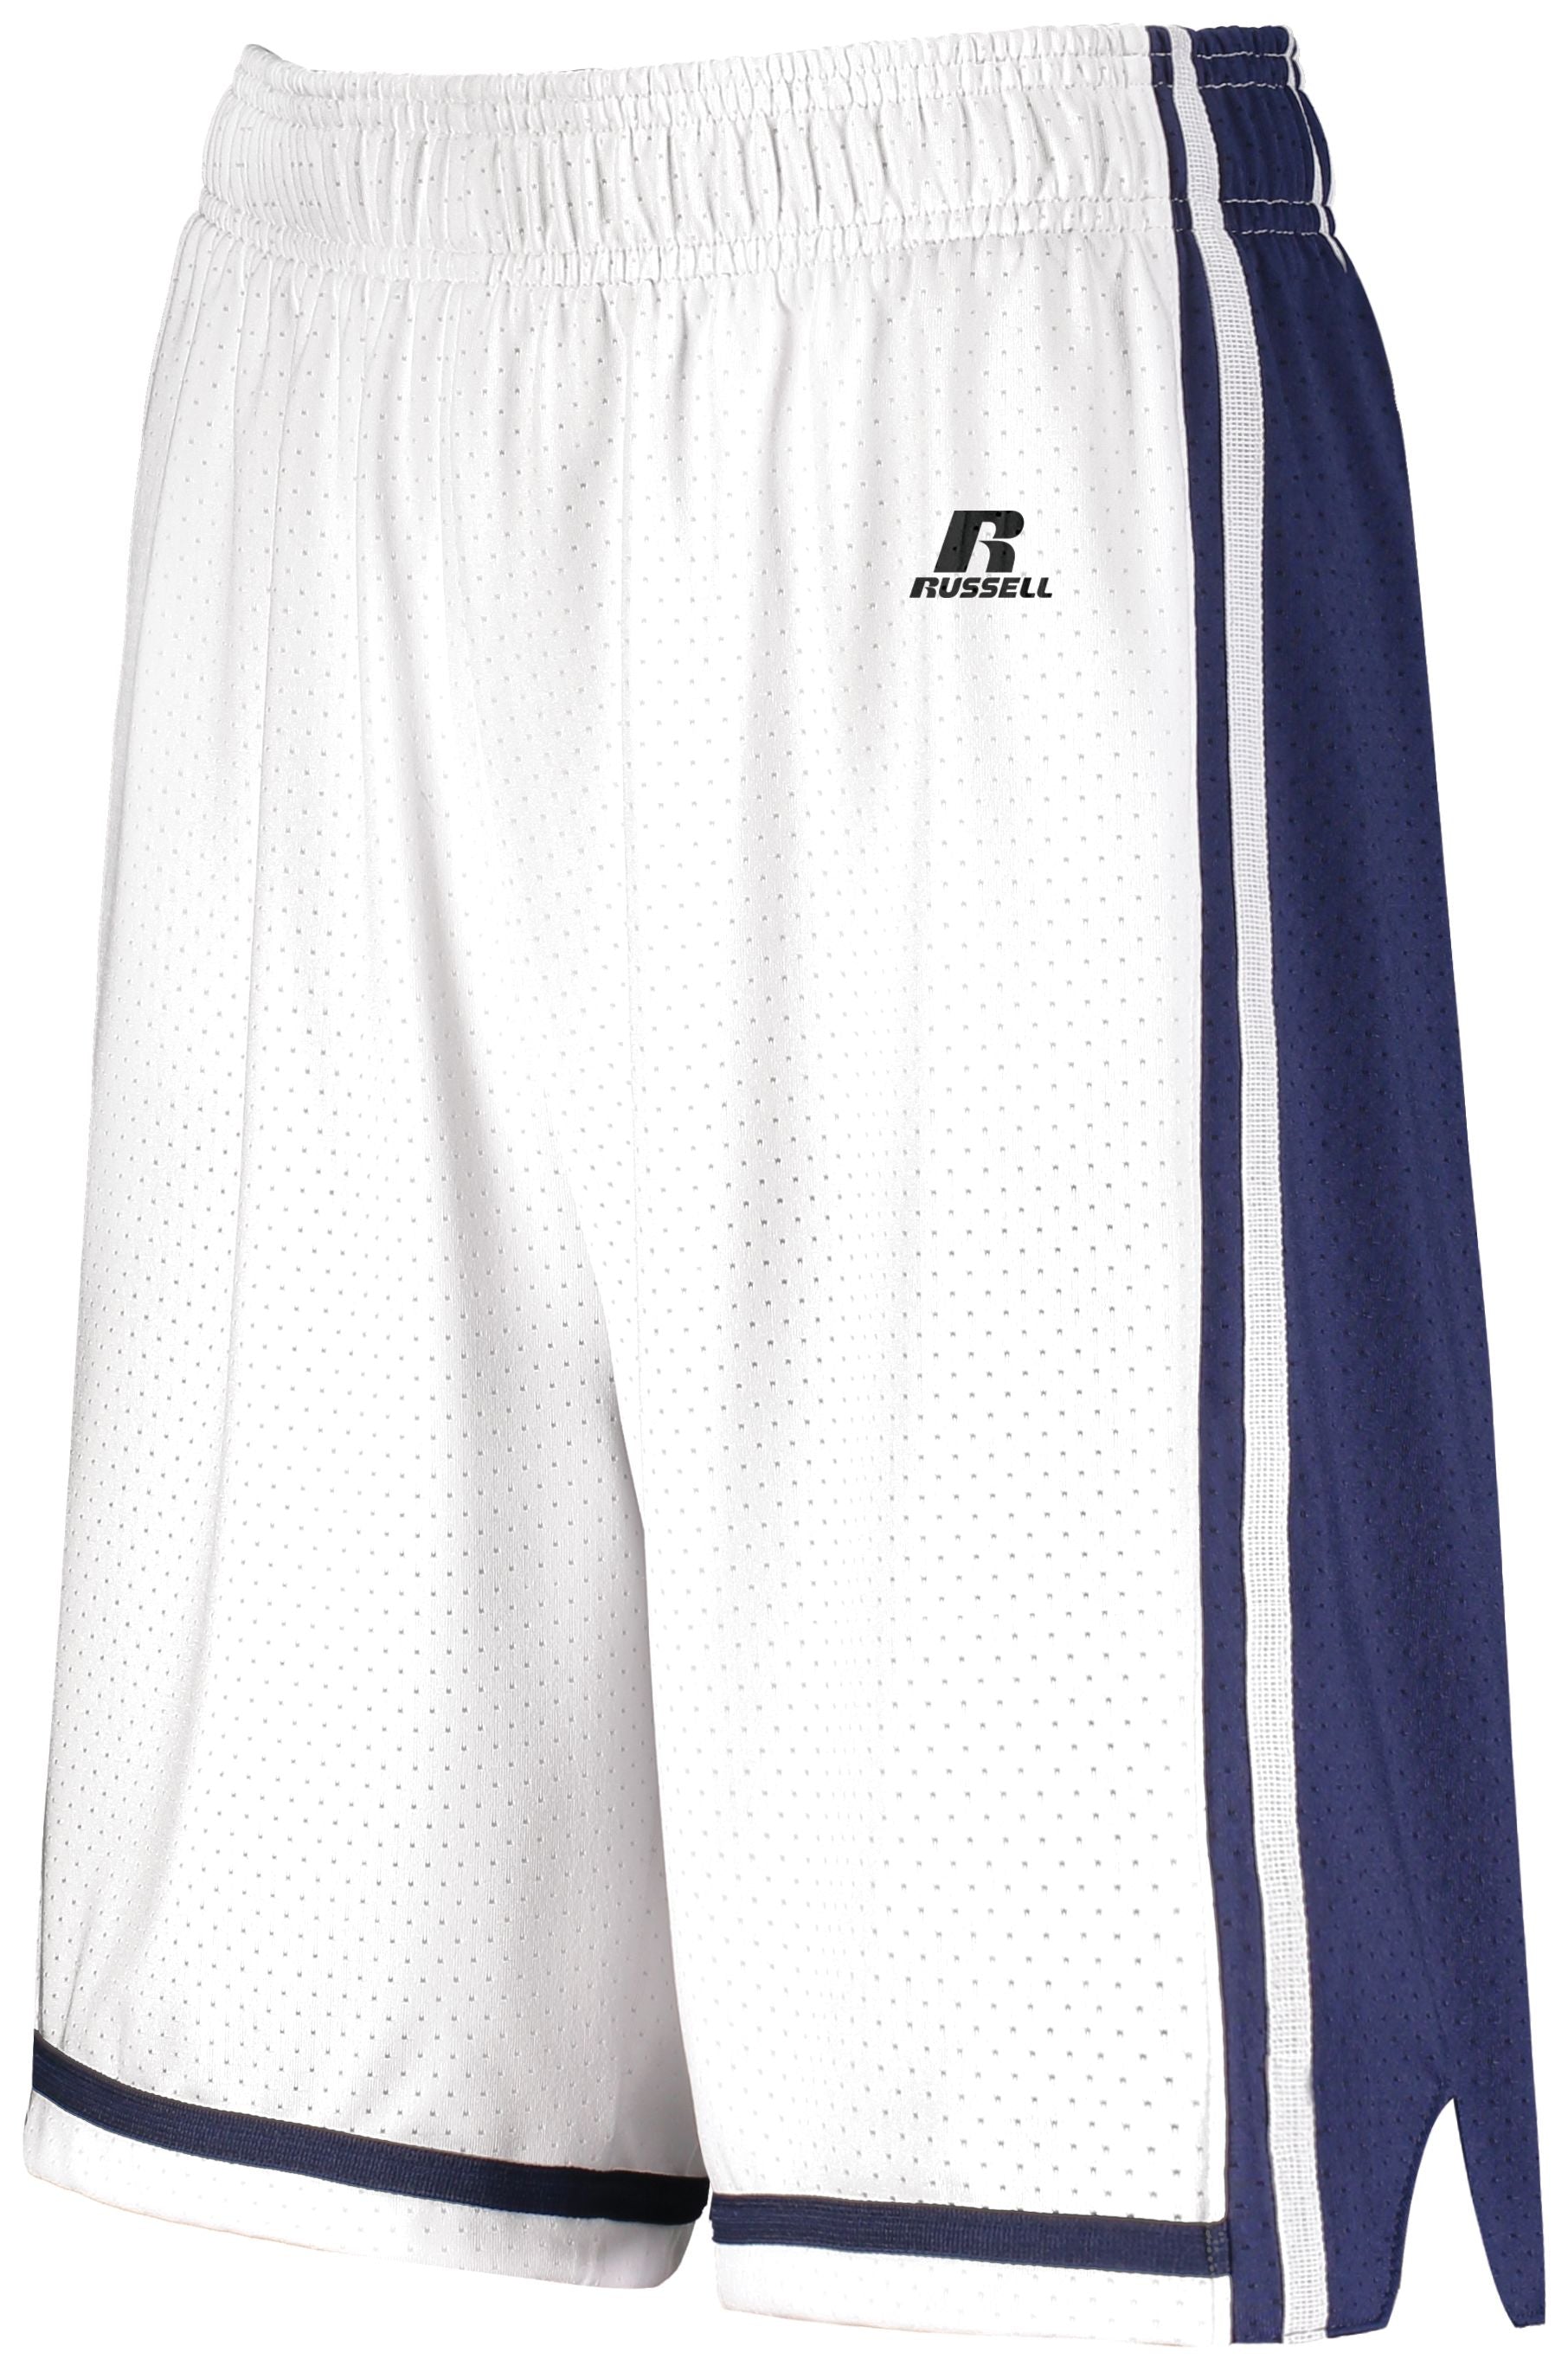 Russell Athletic Ladies Legacy Basketball Shorts in White/Navy  -Part of the Ladies, Ladies-Shorts, Basketball, Russell-Athletic-Products, All-Sports, All-Sports-1 product lines at KanaleyCreations.com